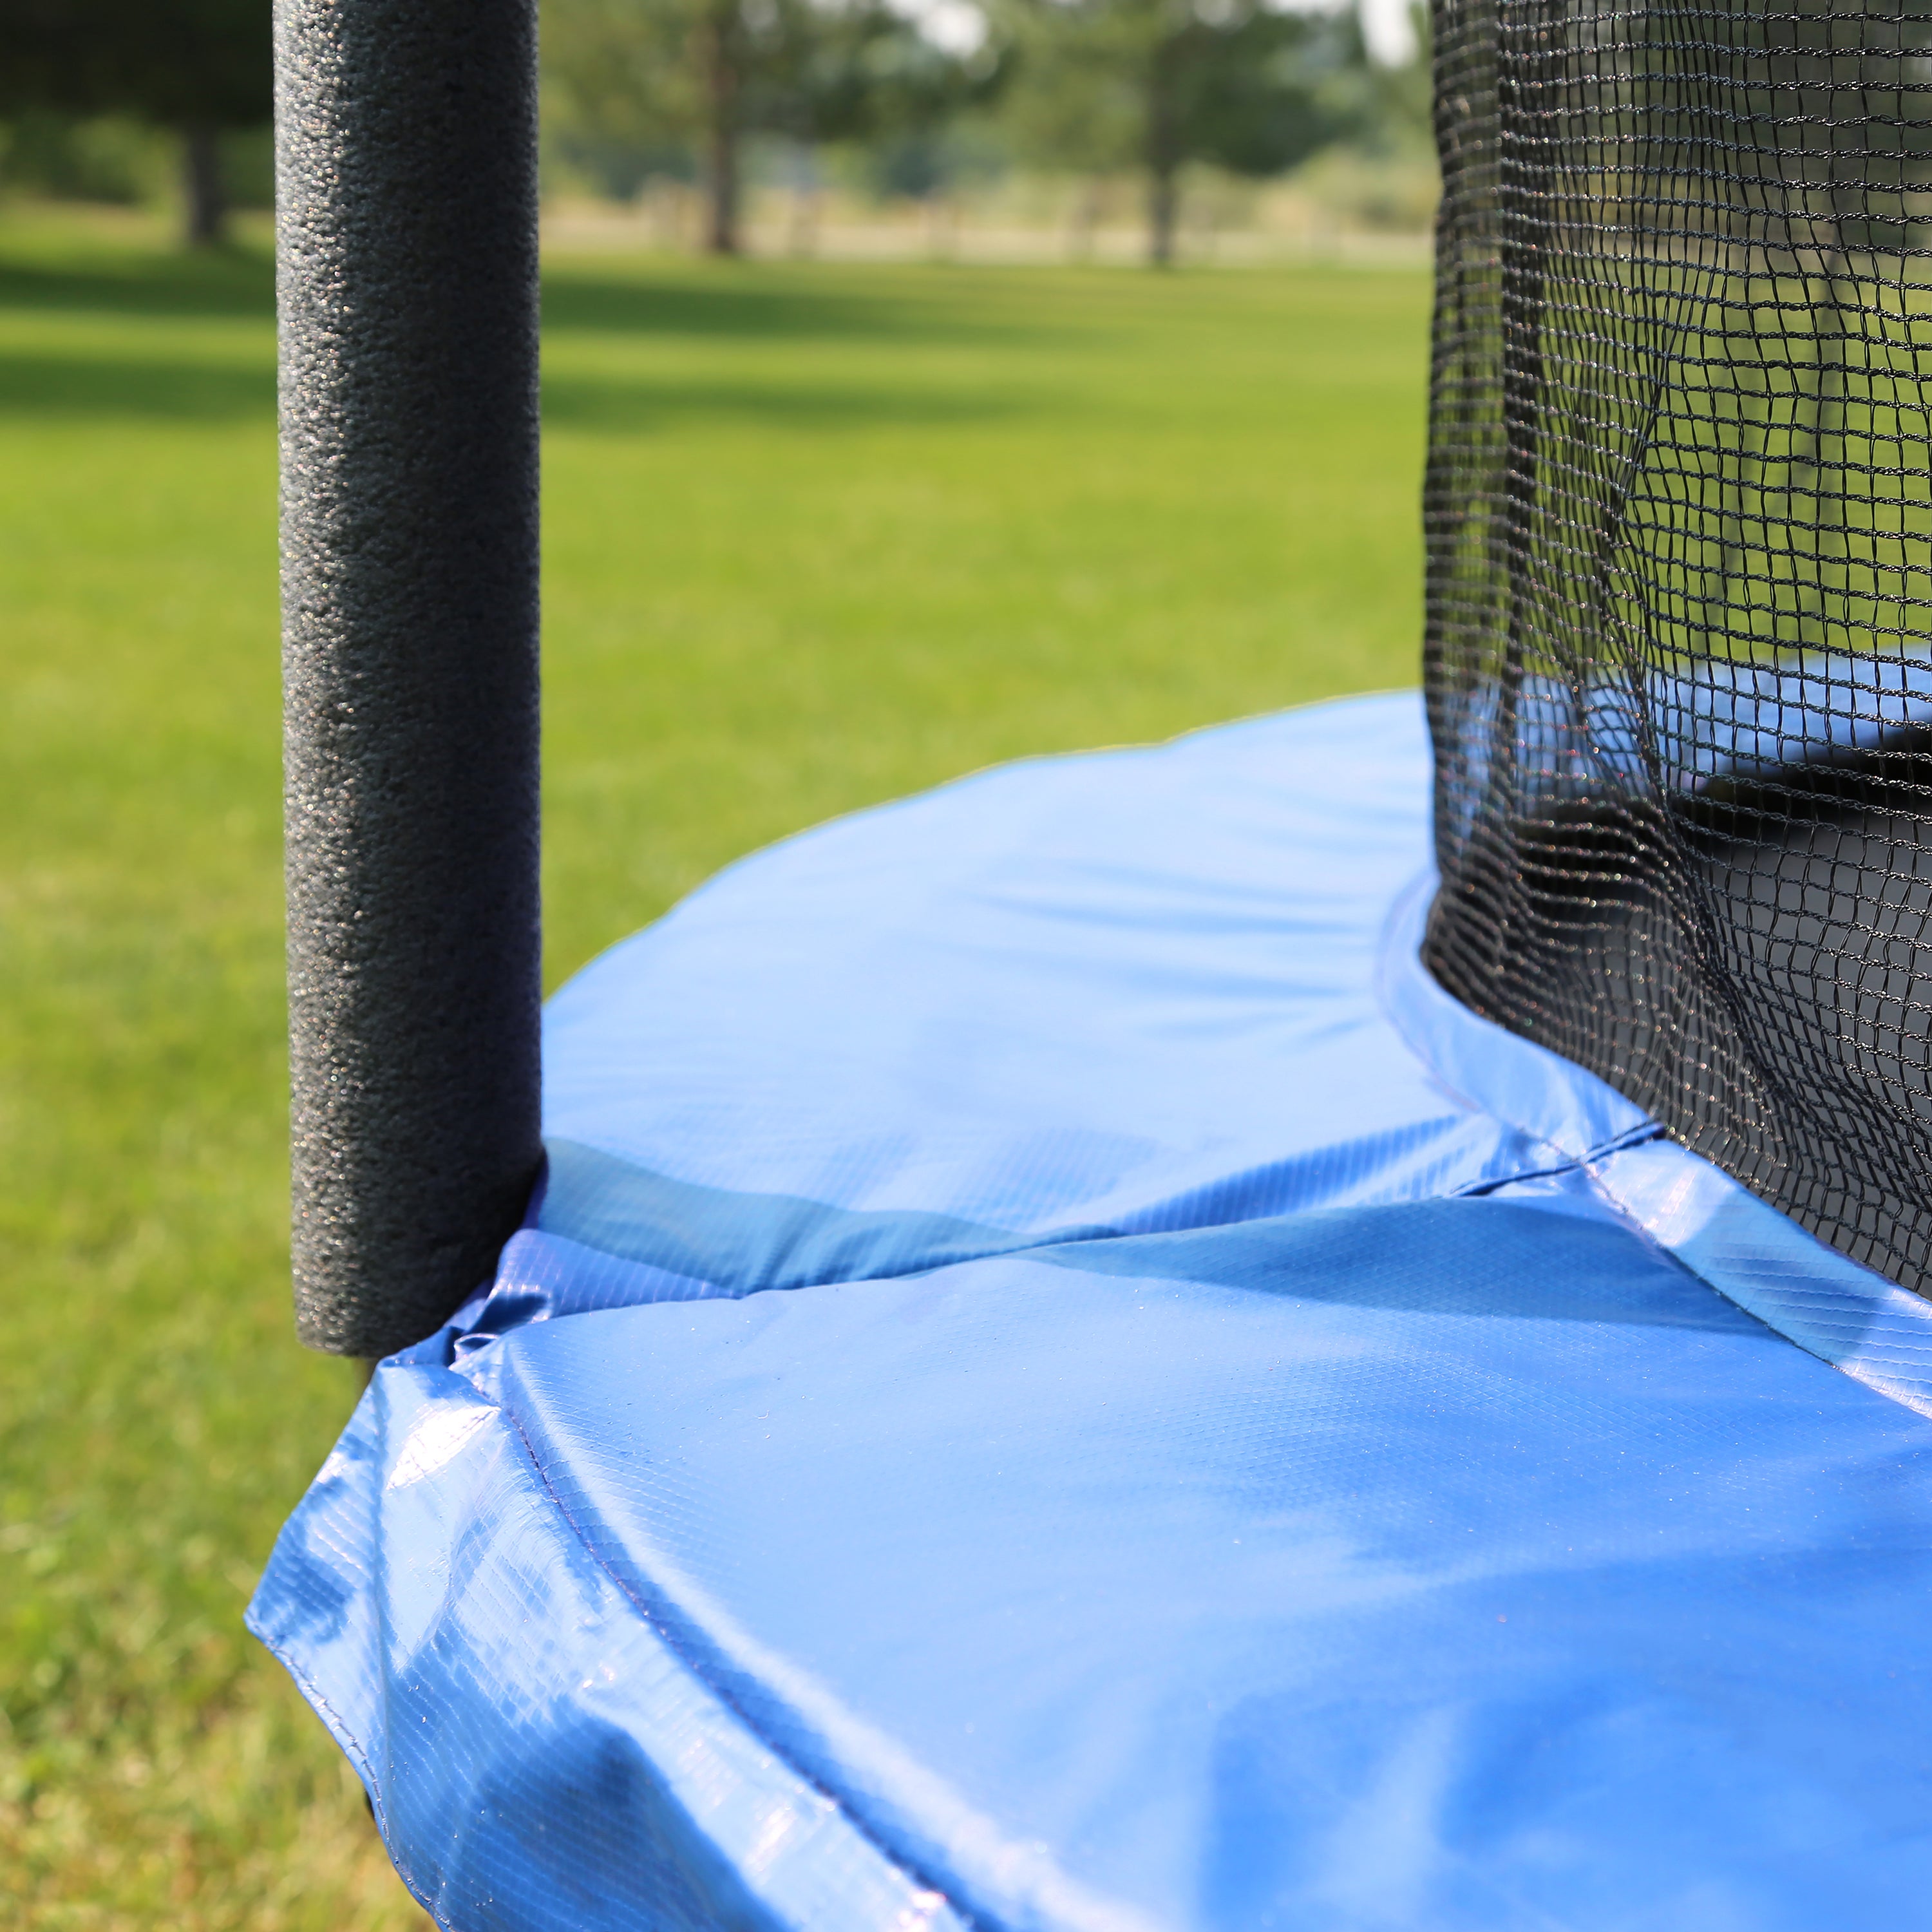 14' Round Trampoline with Enclosure and Wind Stakes - Bright Blue